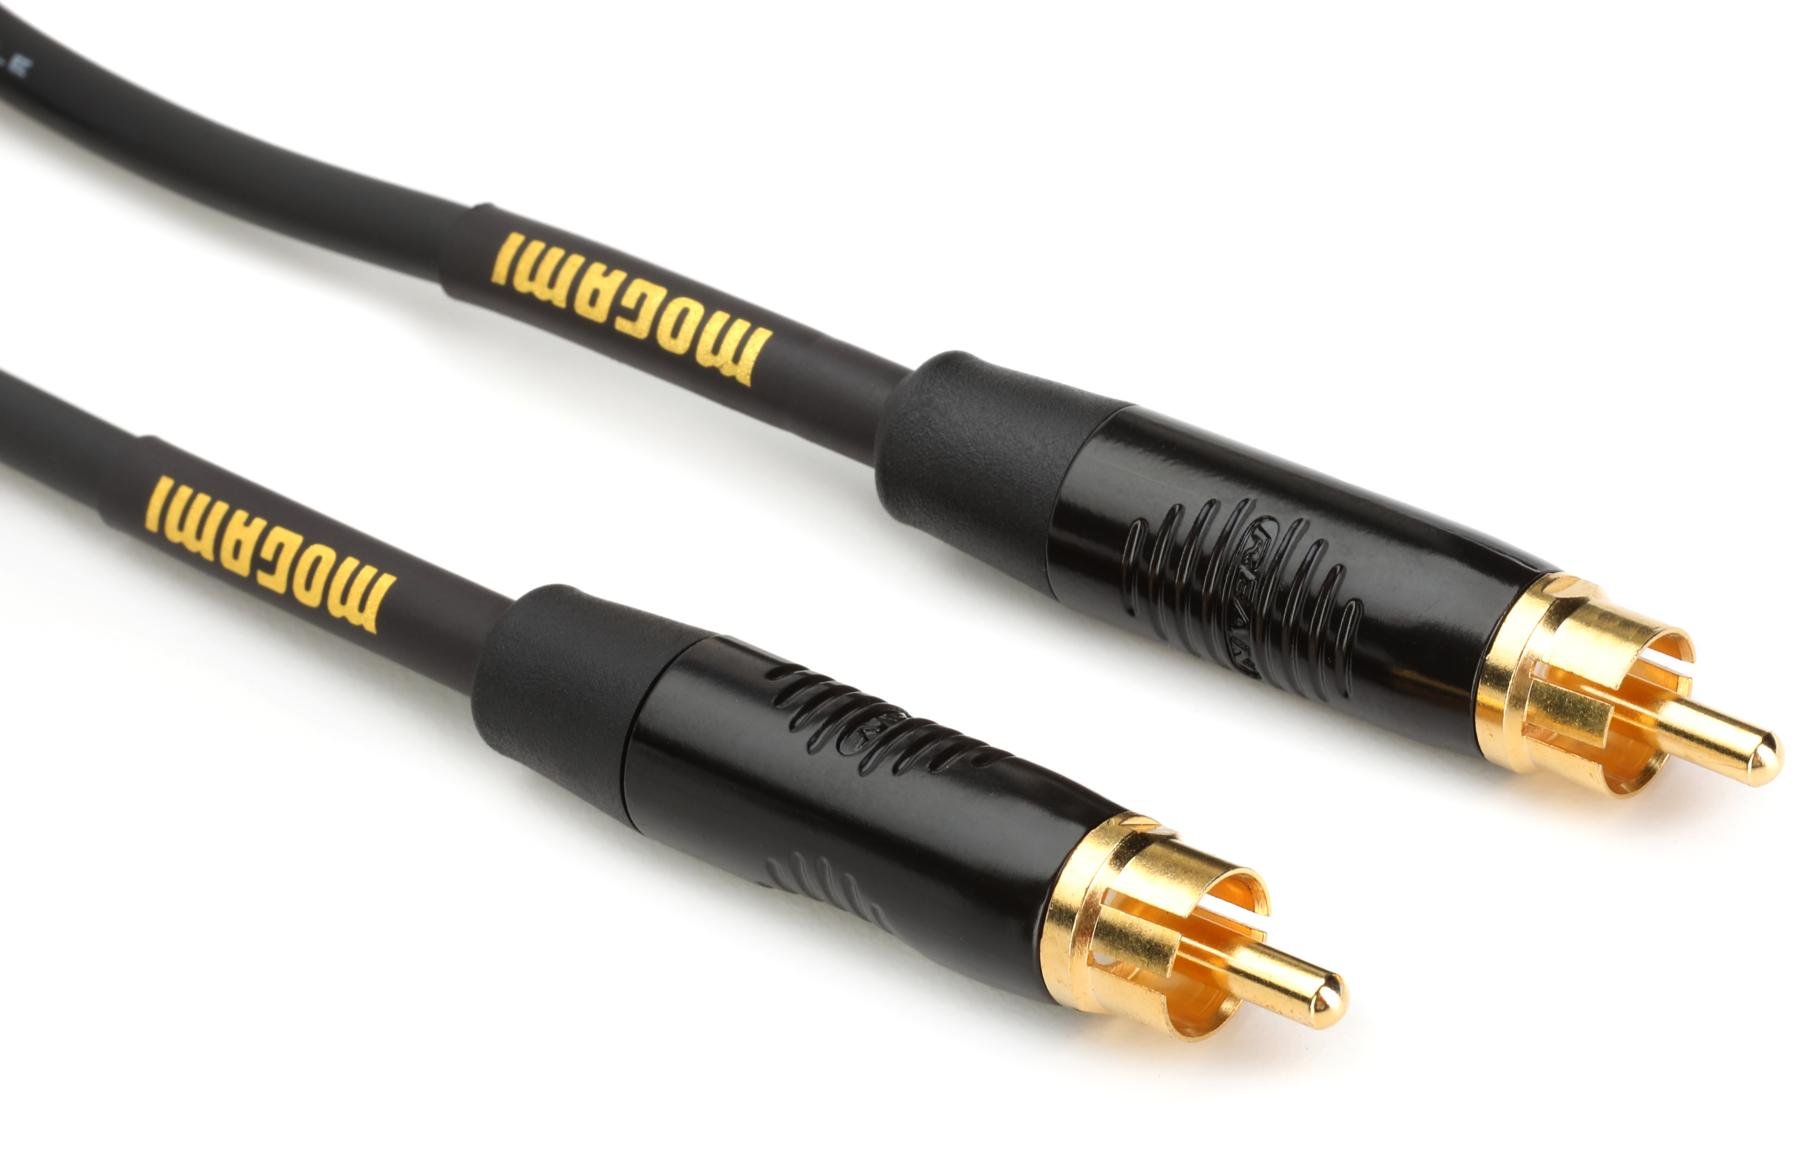 Mogami Gold RCA-RCA Cable - 6 foot | Sweetwater